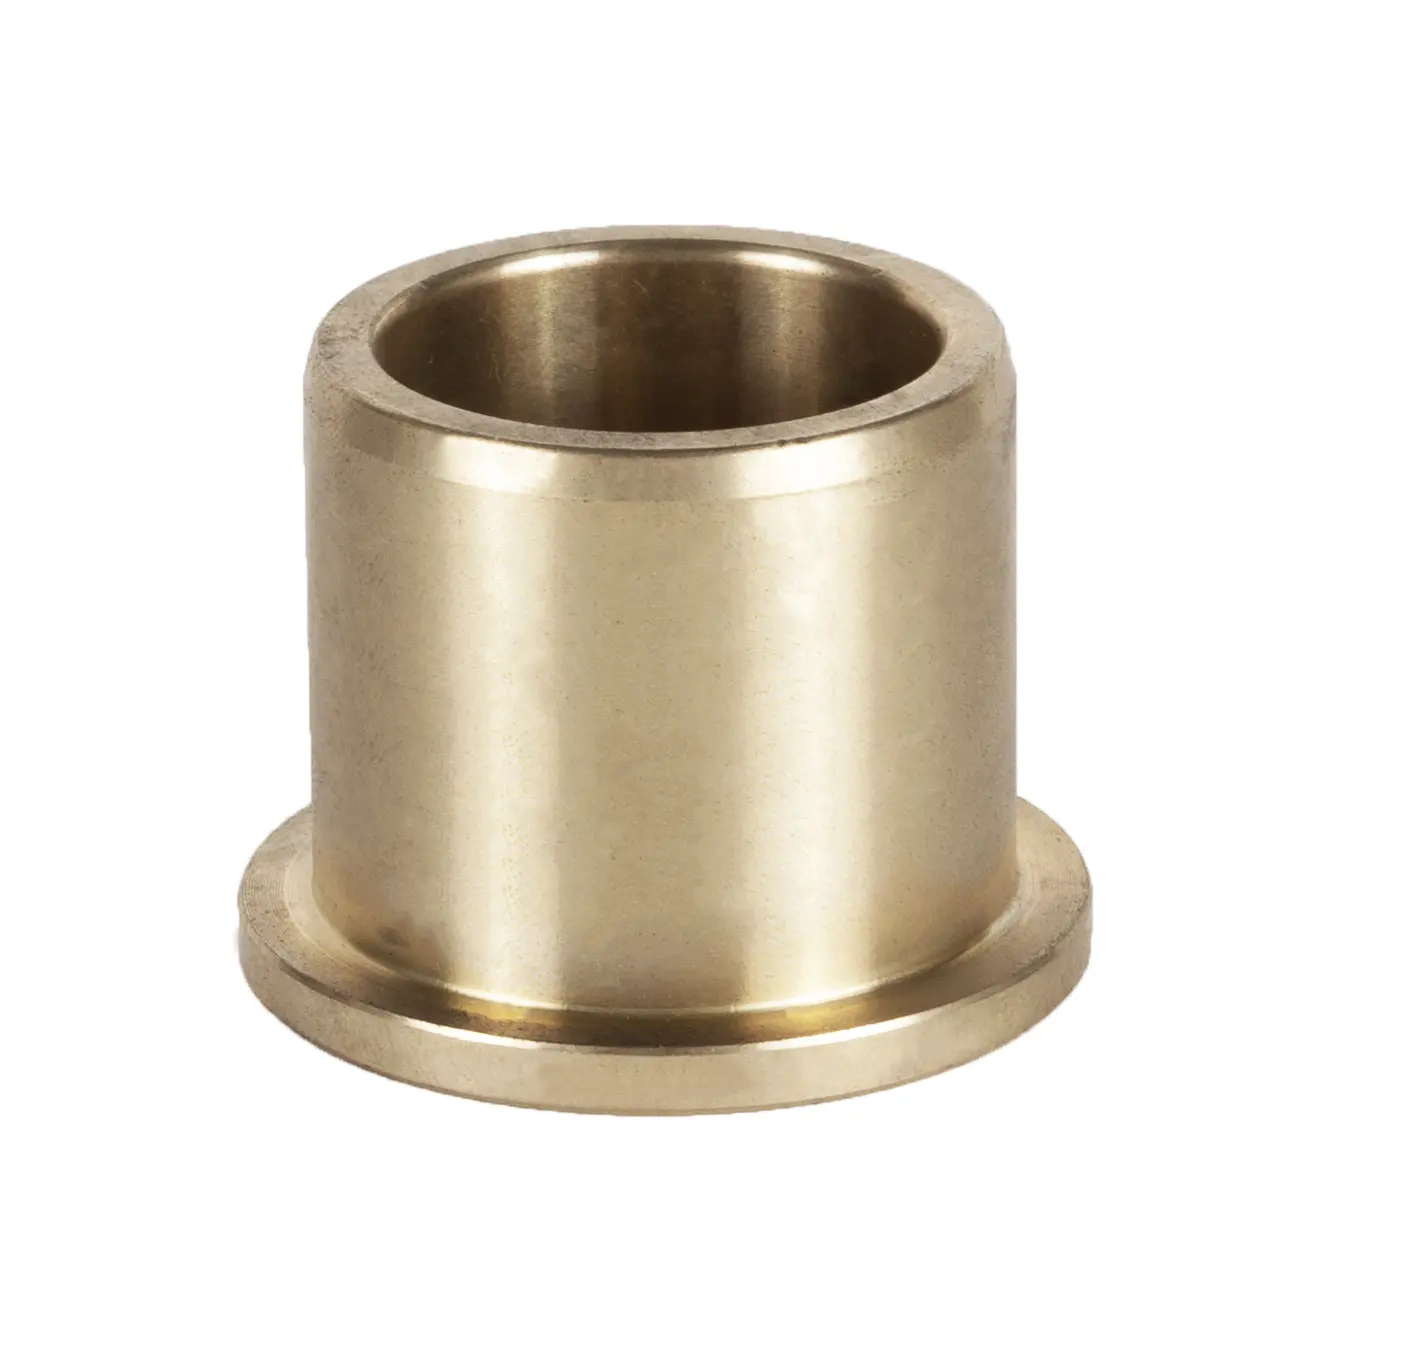 factory direct centrifugal casting shoulder brass self-lubricating bushings